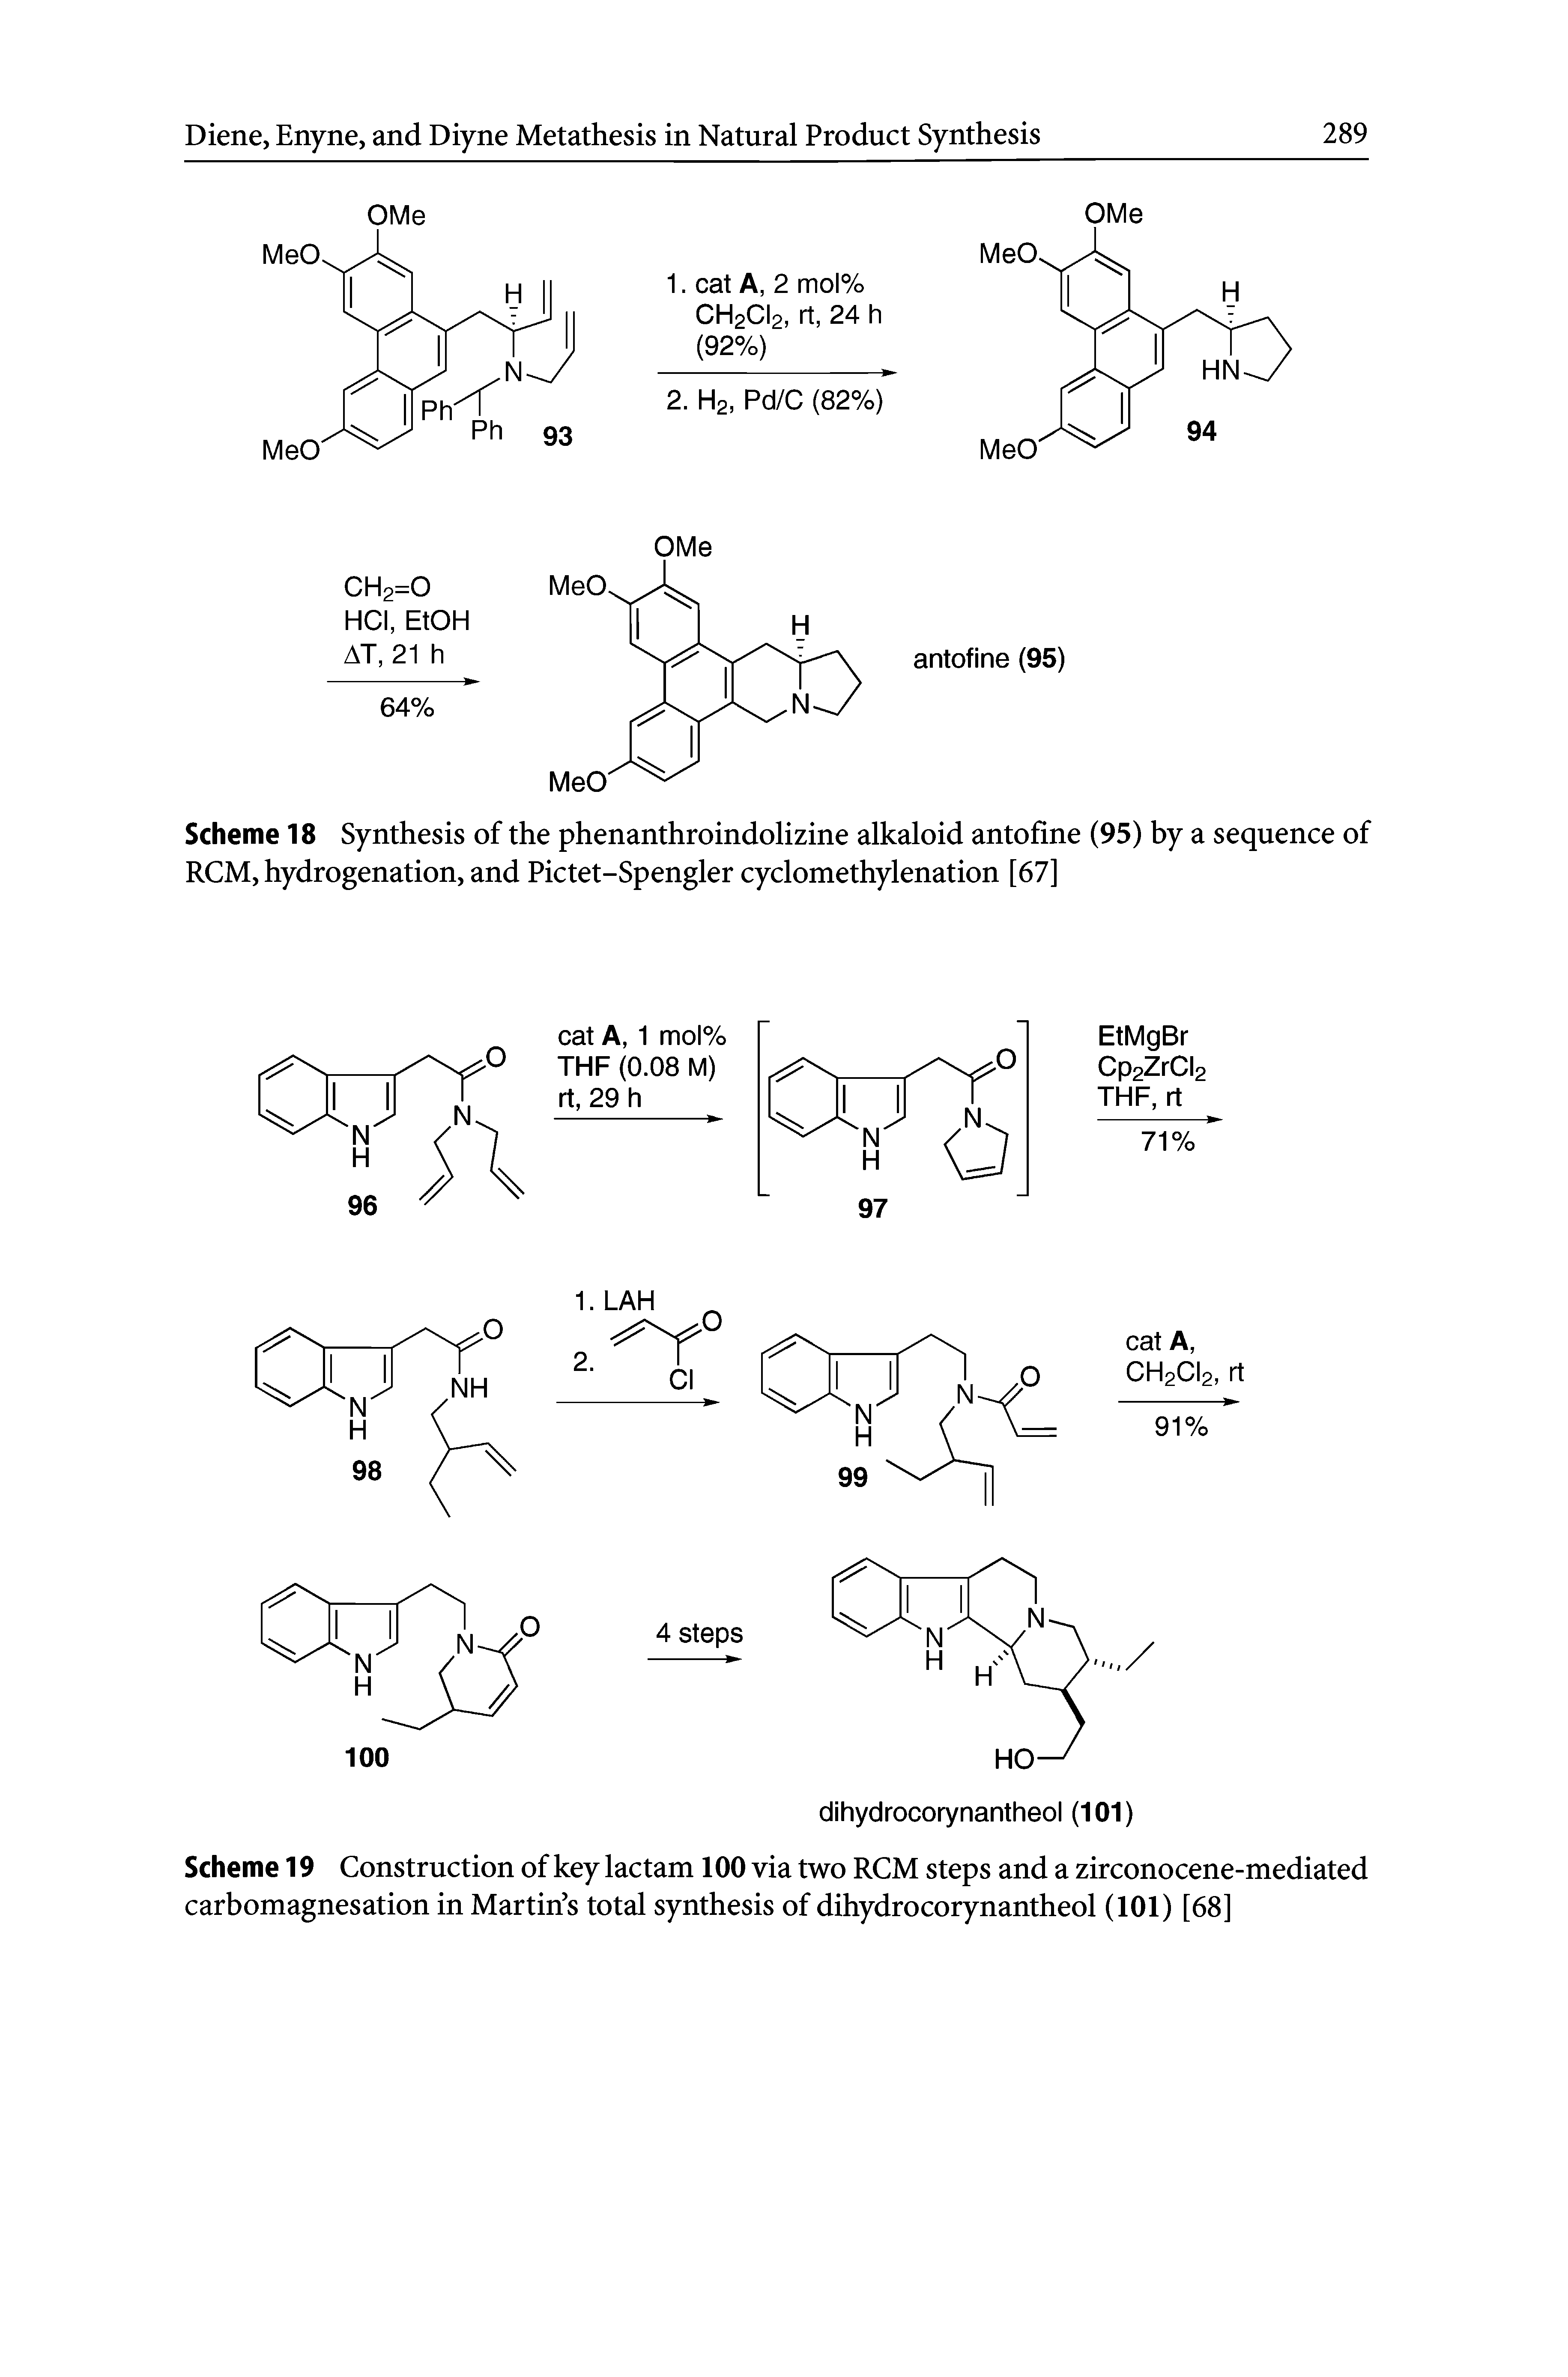 Scheme 18 Synthesis of the phenanthroindolizine alkaloid antofine (95) by a sequence of RCM, hydrogenation, and Pictet-Spengler cyclomethylenation [67]...